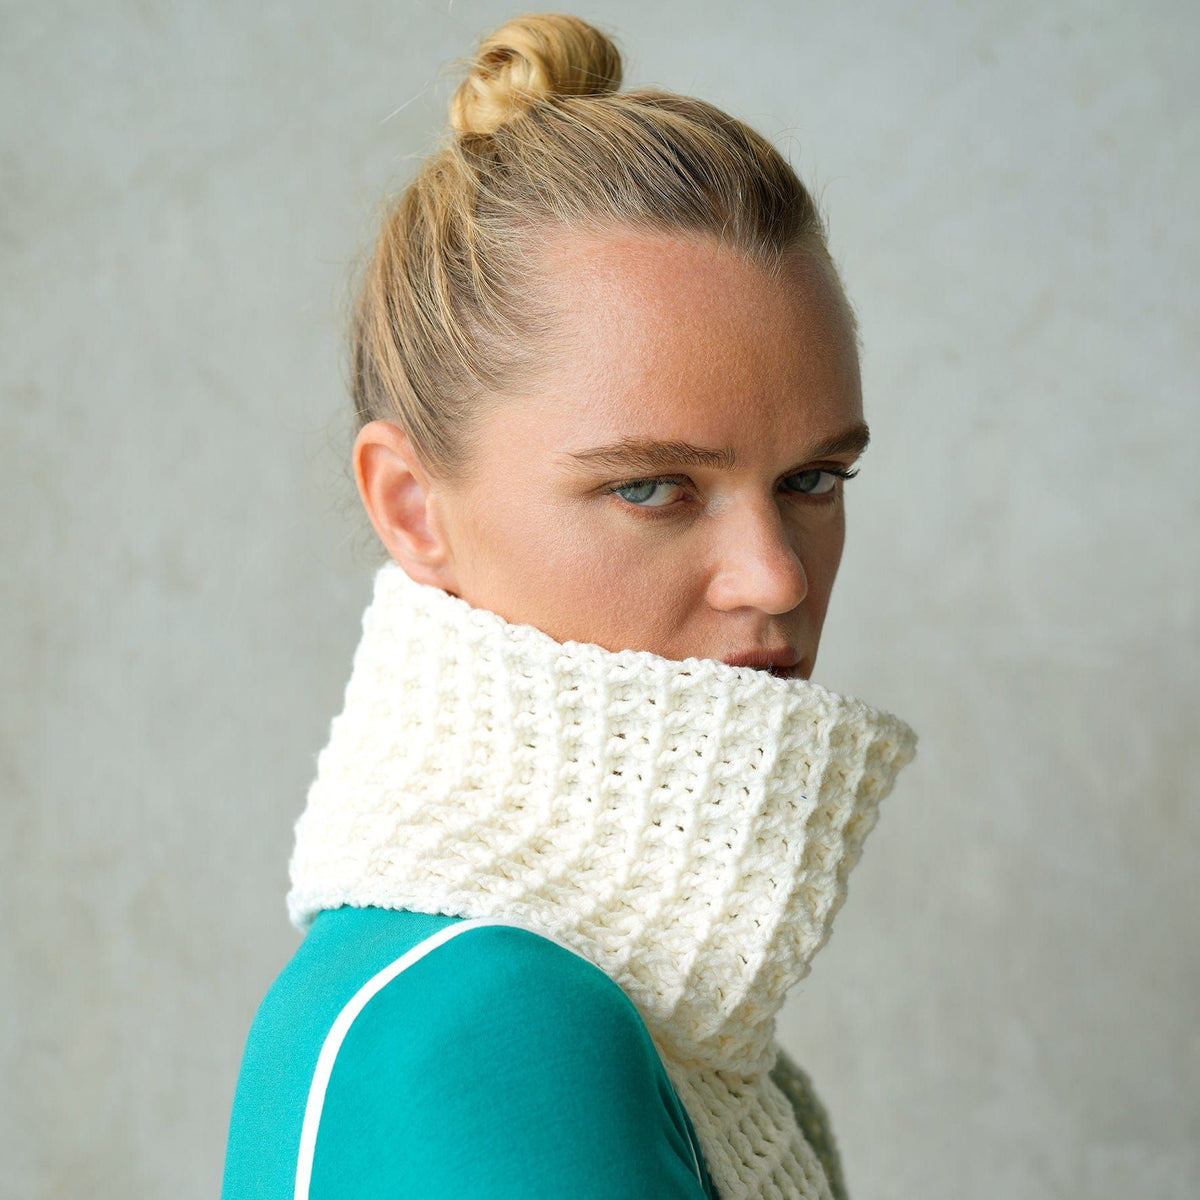 BrunnaCo One size / Off white / 100% Cotton Waffle Crochet Scarf in Off White by BrunnaCo